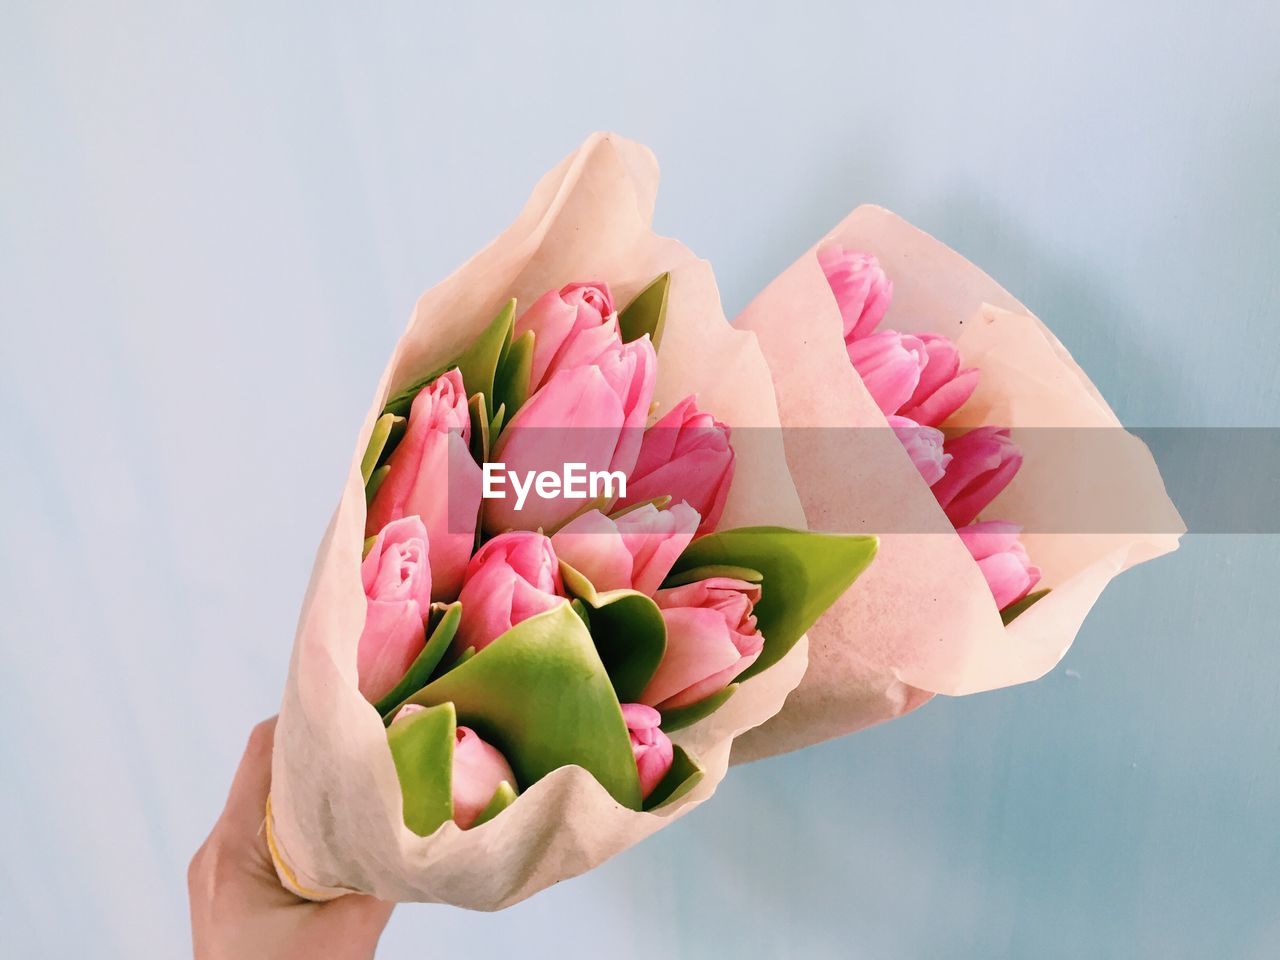 Cropped image of hand holding tulips bouquet against sky